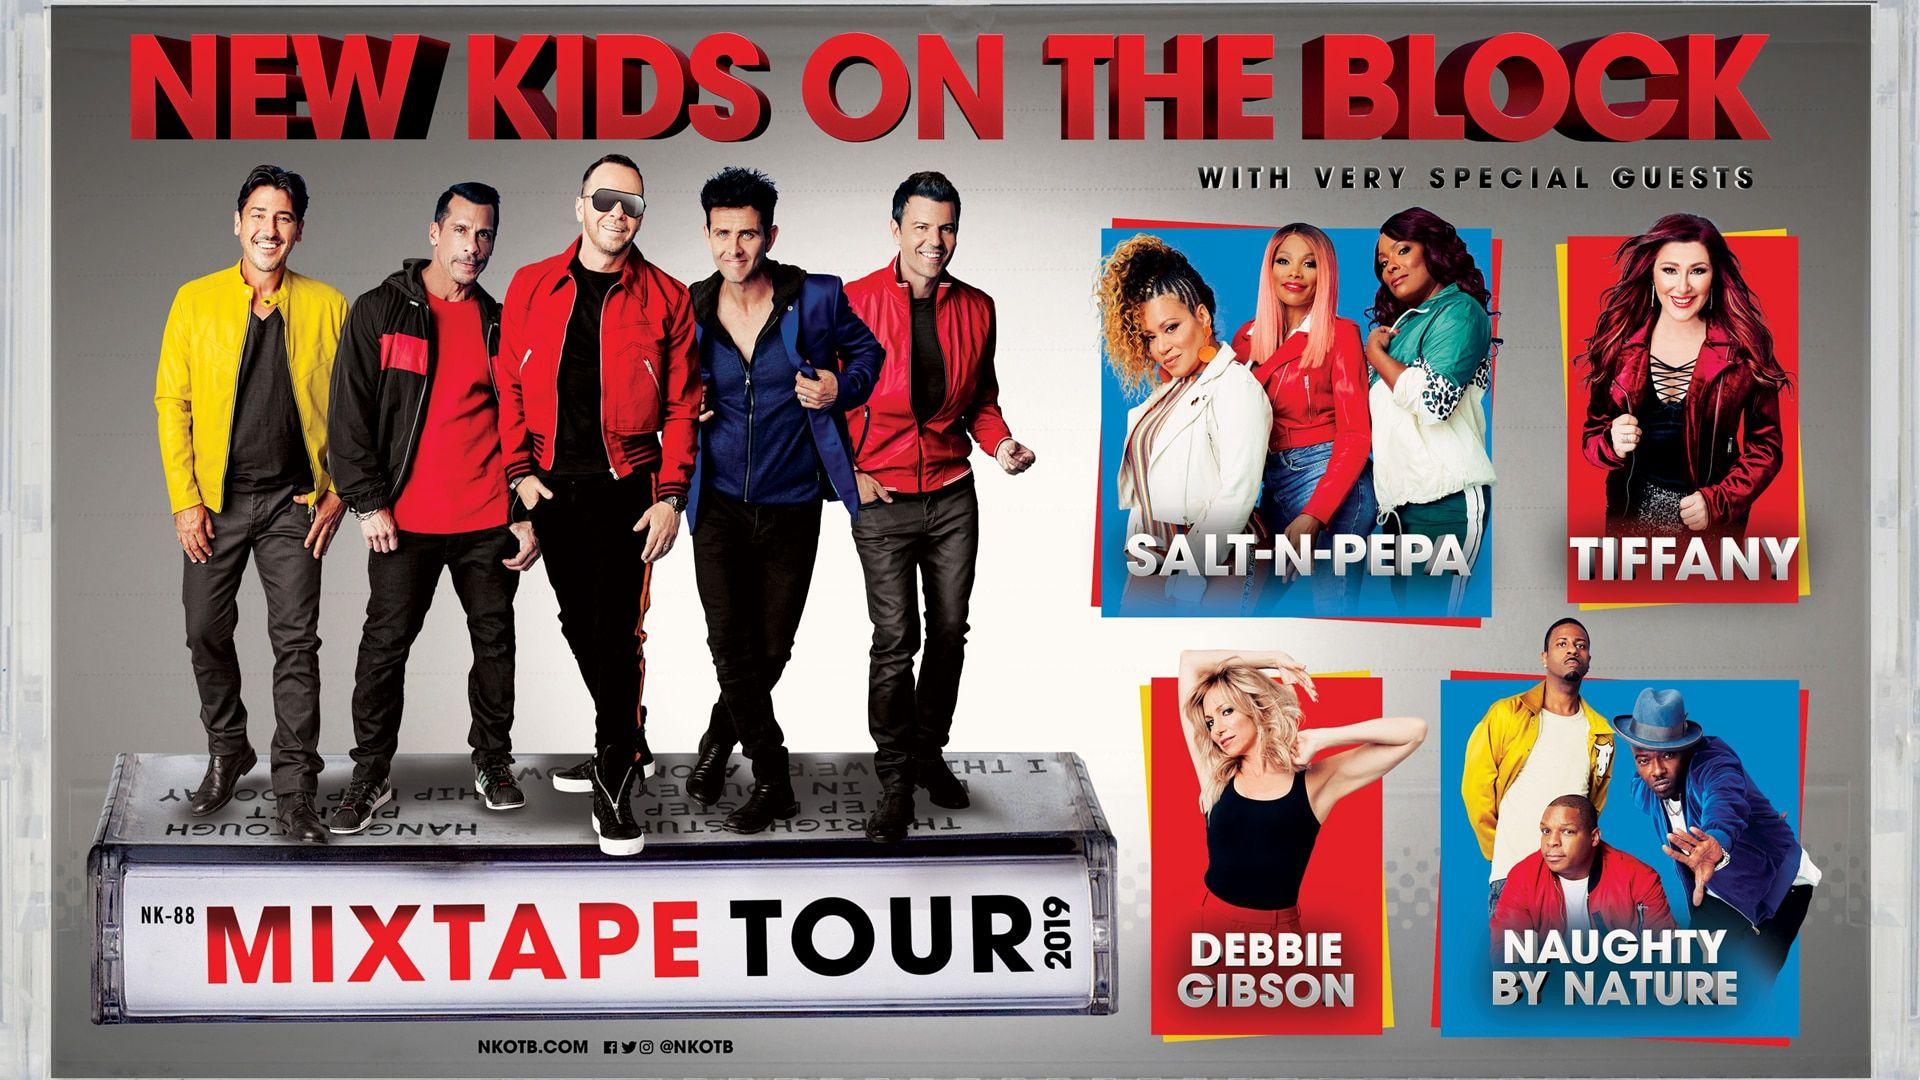 New Kids on the Block Tour. Capital One Arena